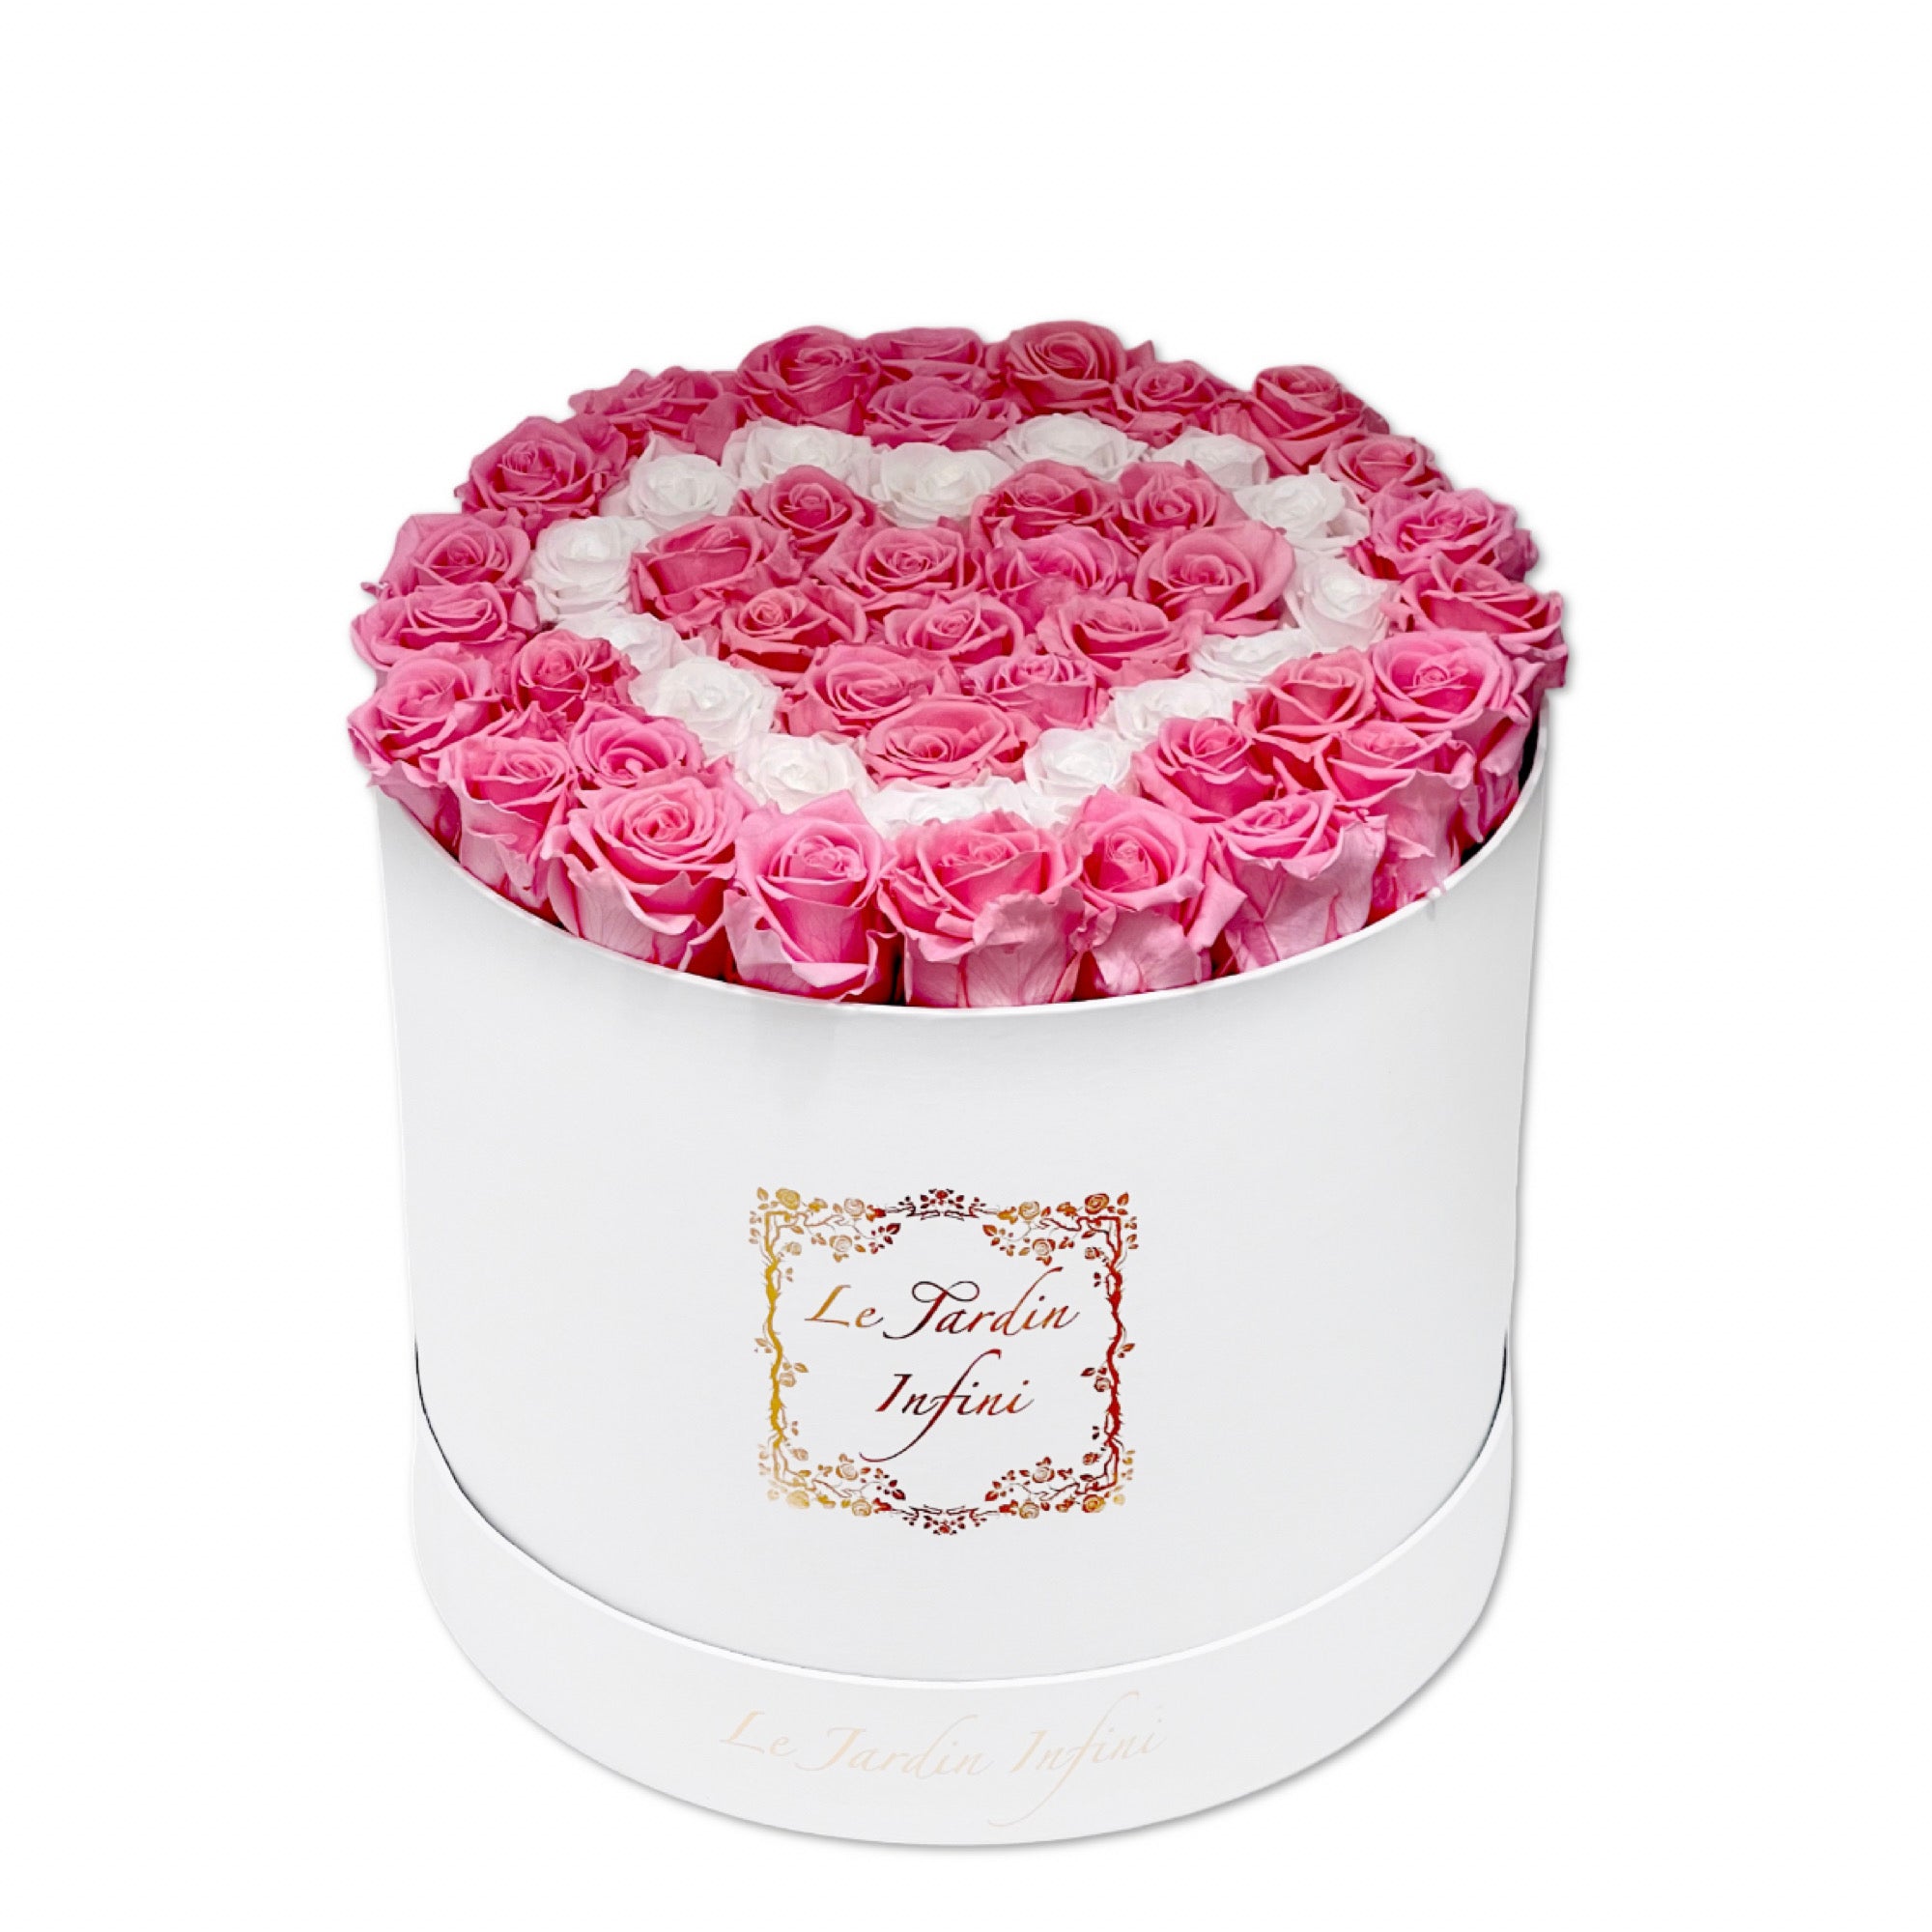 Heart Design White & Pink Preserved Roses - Luxury Large Round White Box